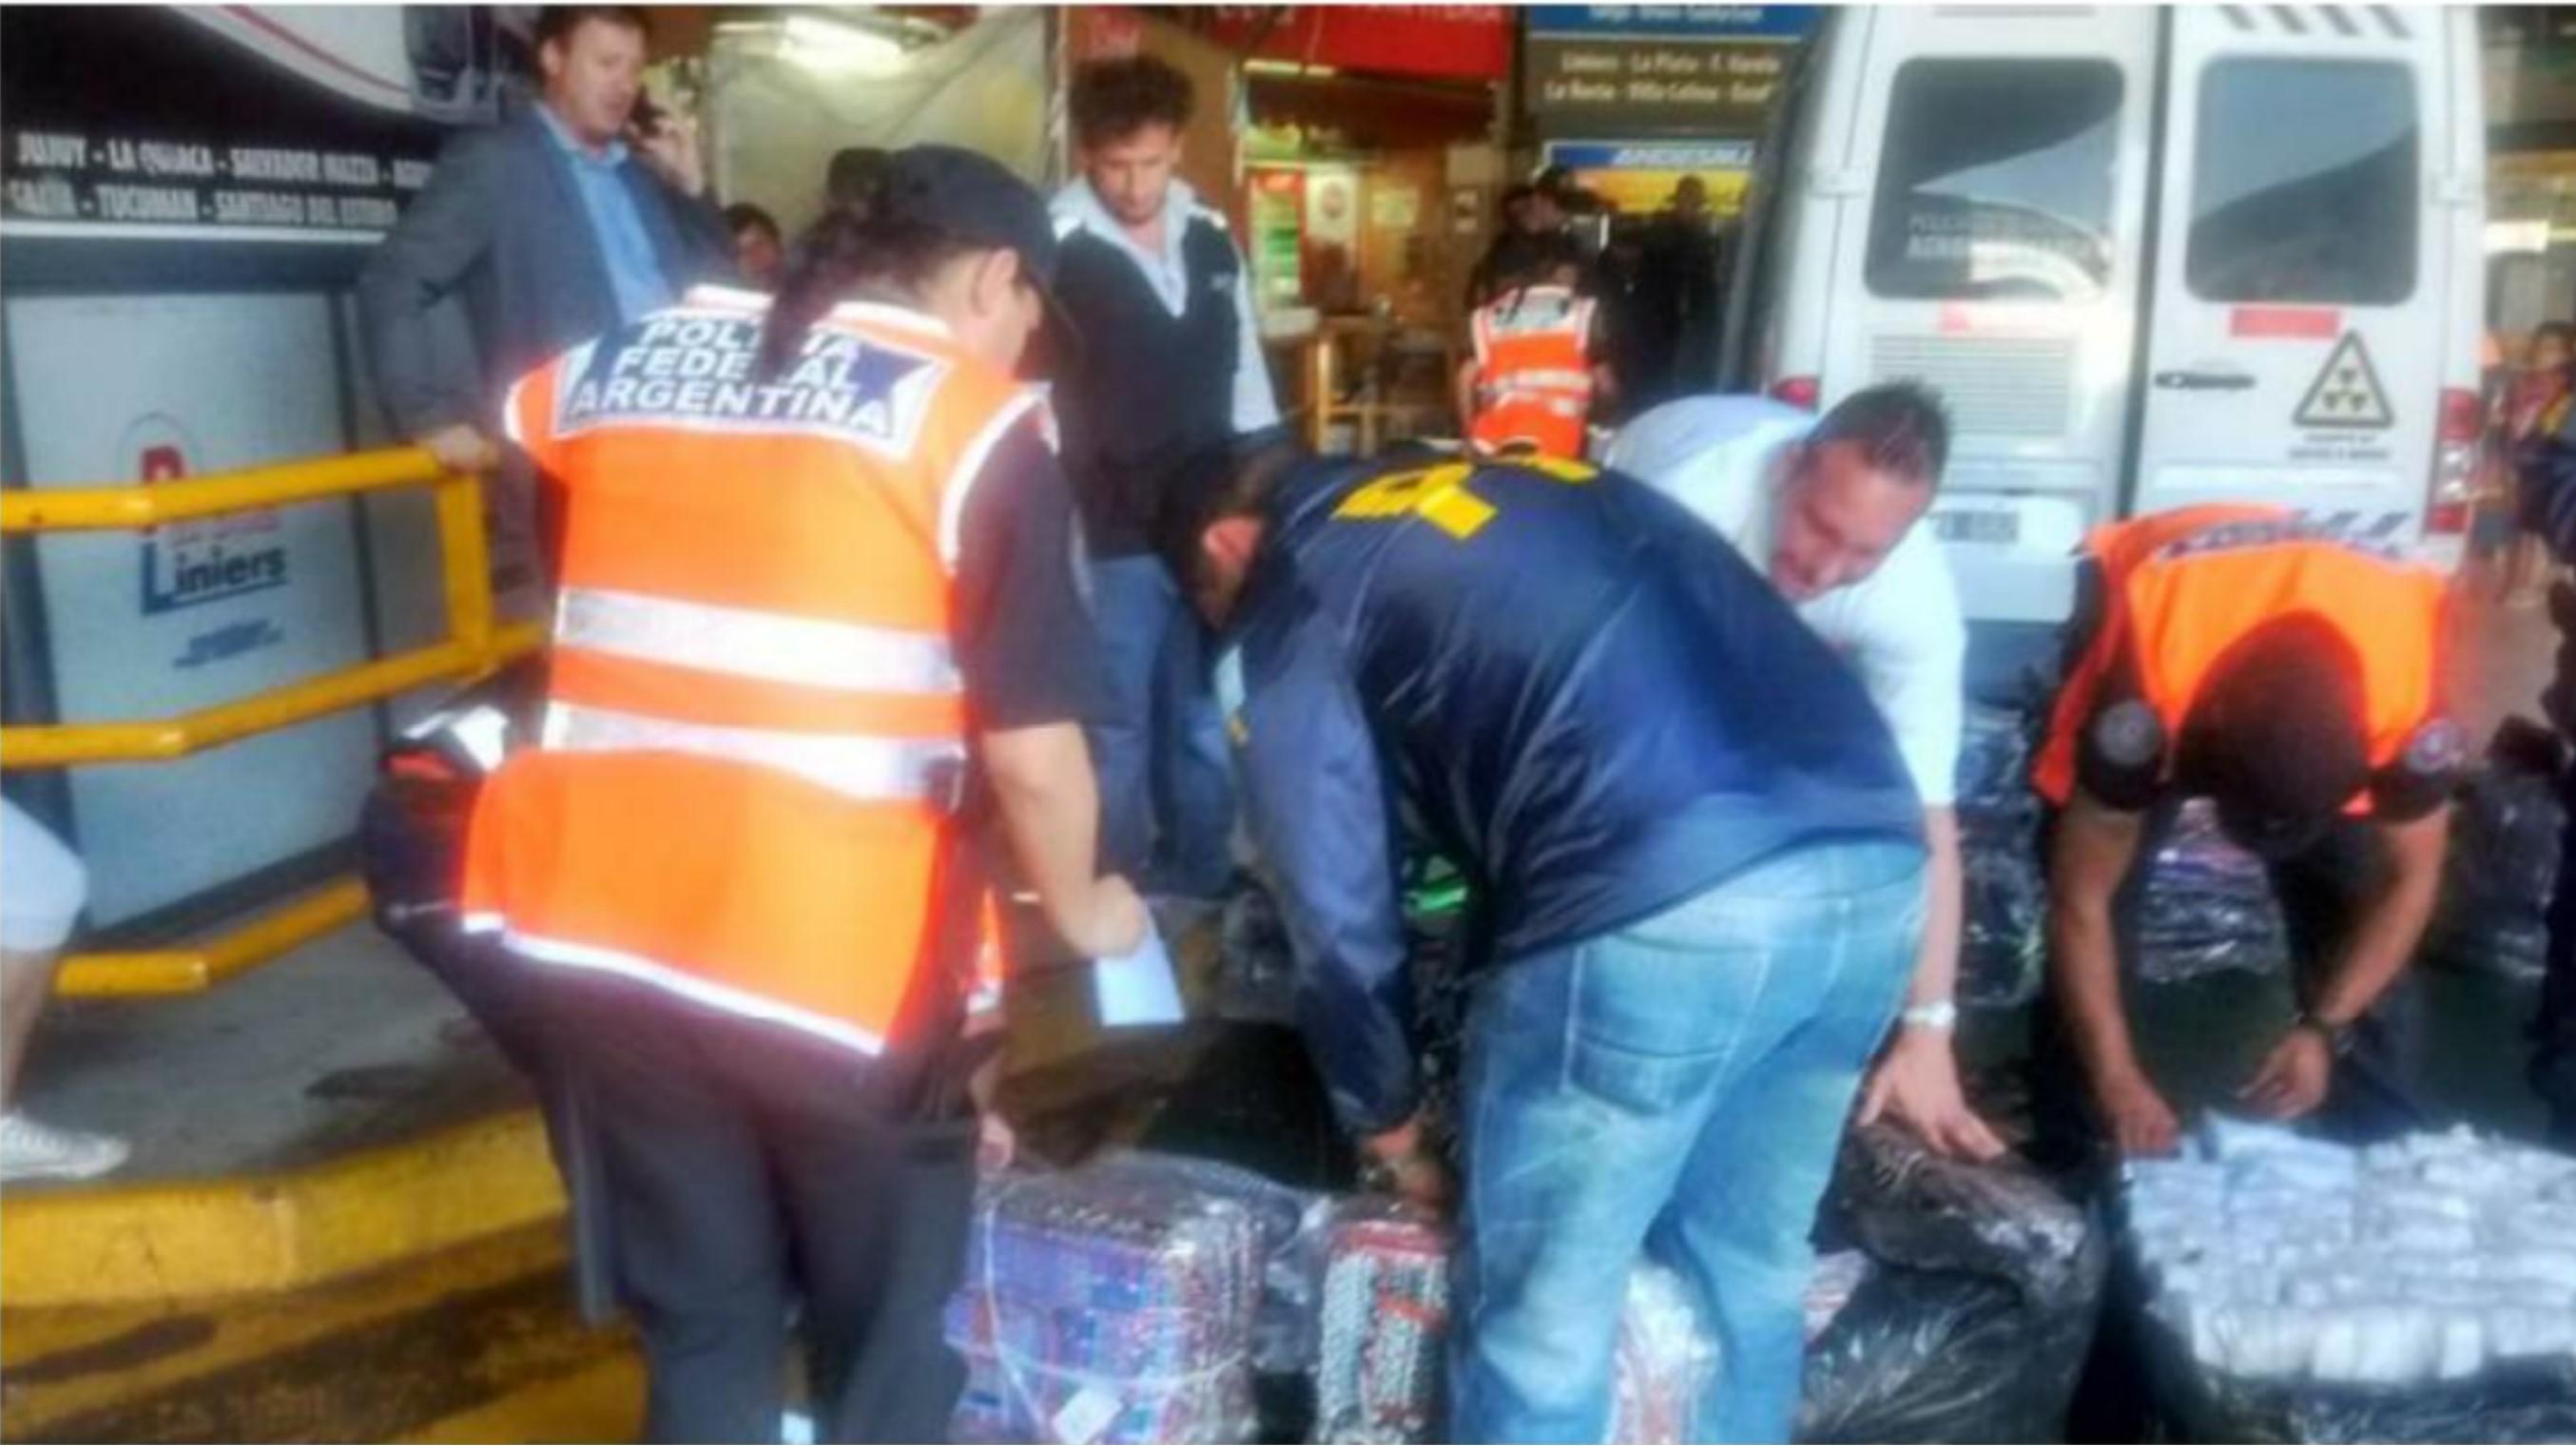 Argentinian police sorting through packages